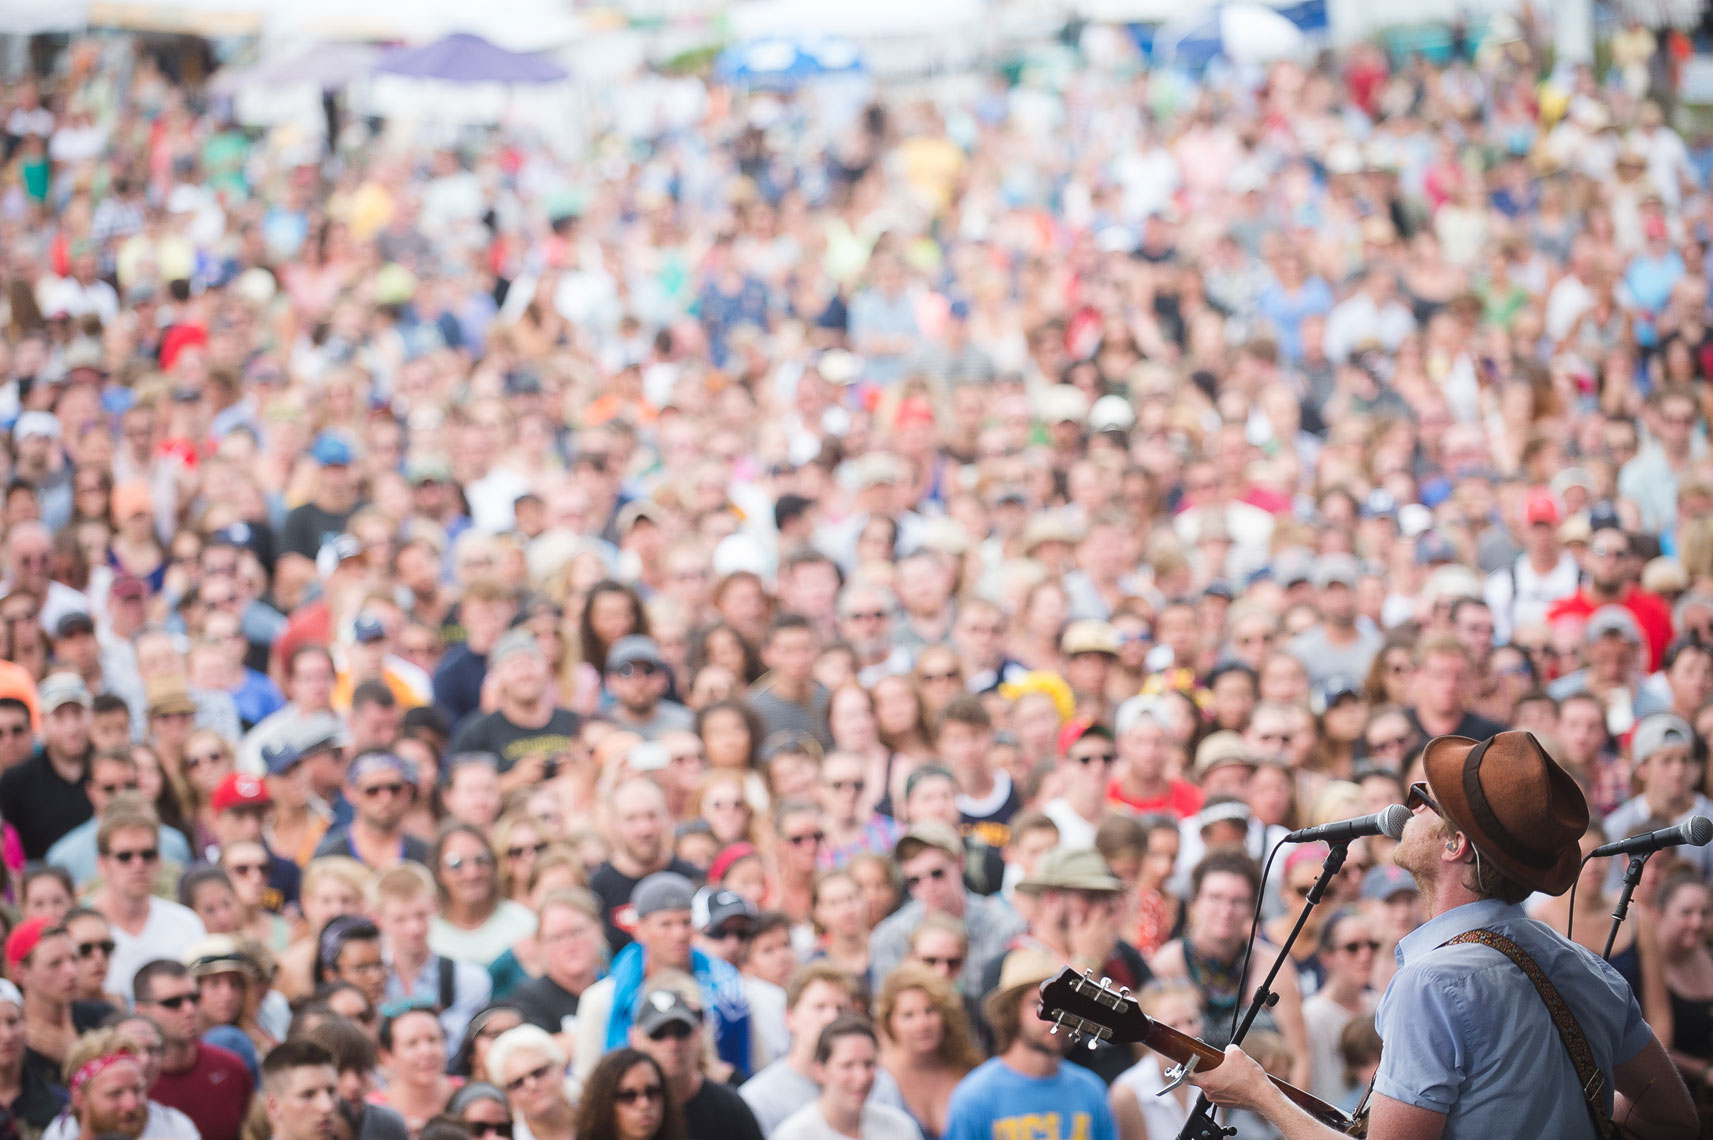 The-Lumineers-perform-at-the-2013-Newport-Folk-Festival-3